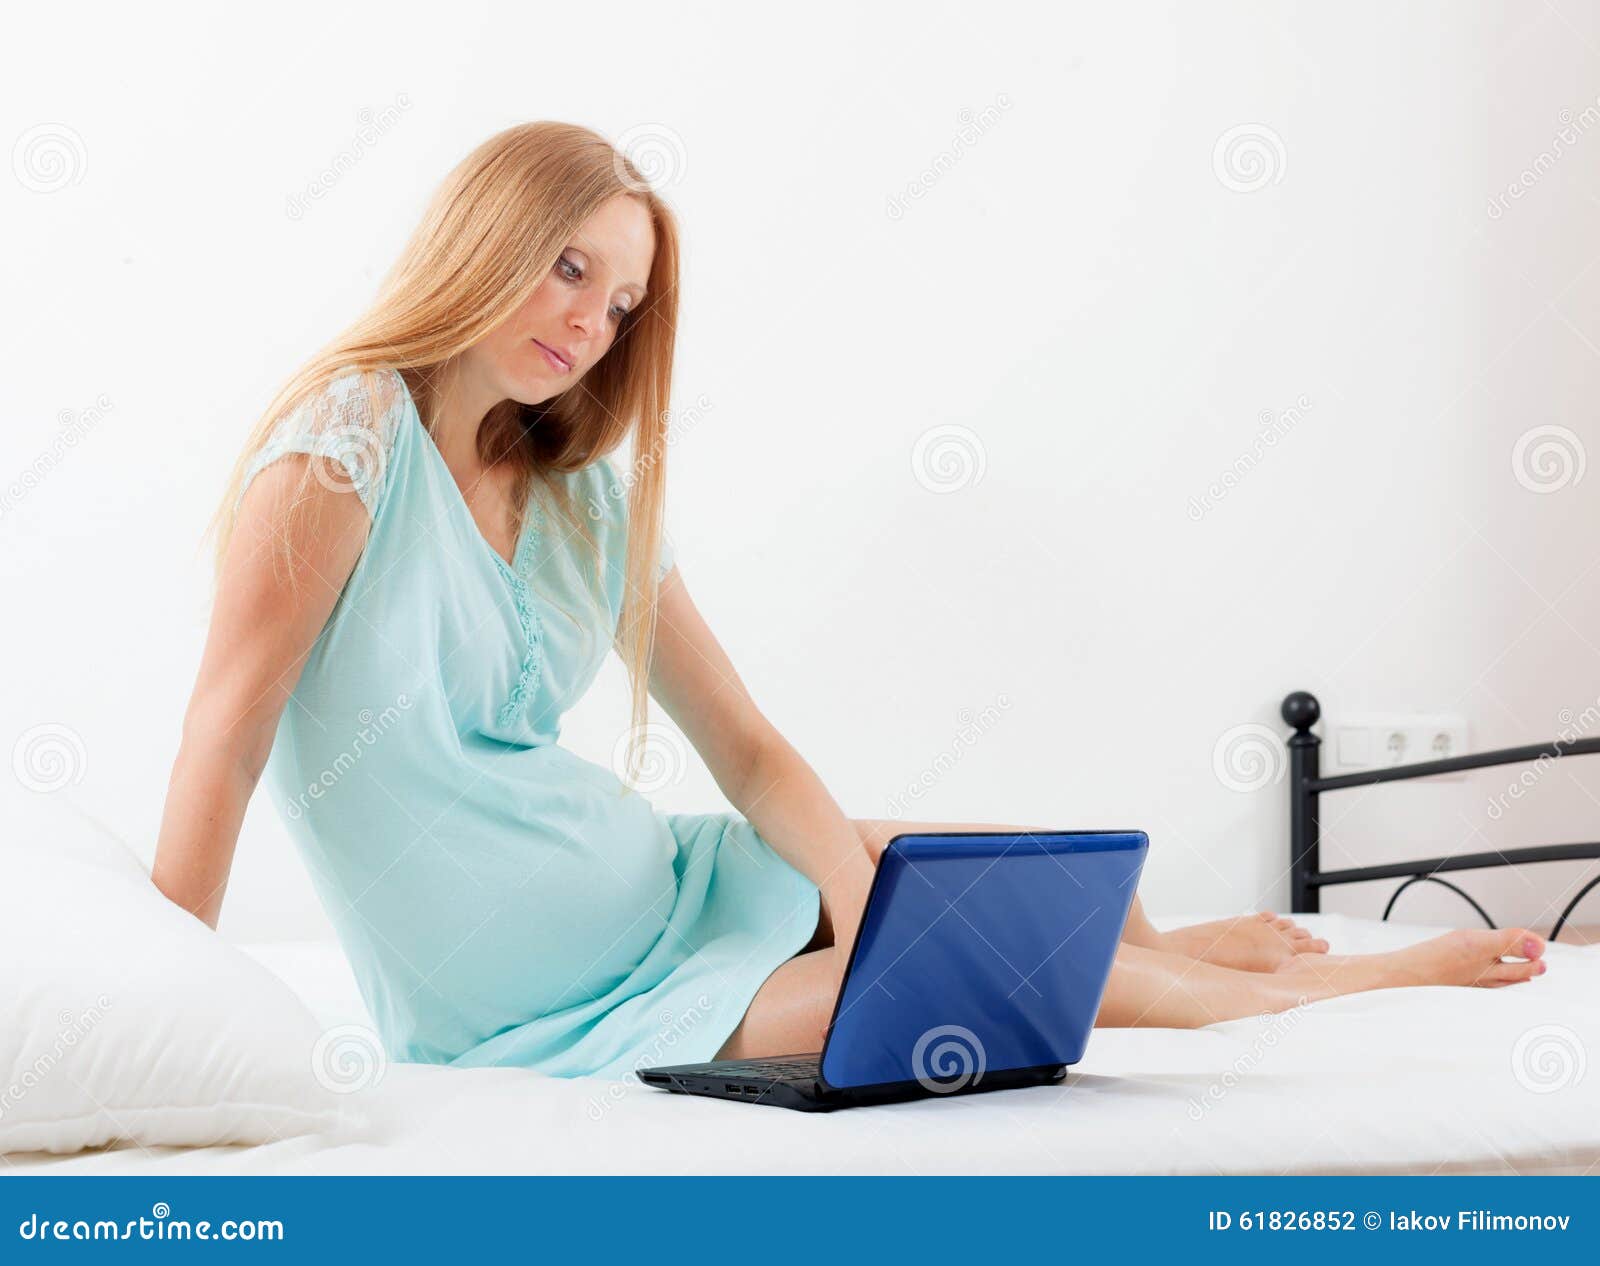 Serious Pregnancy Woman With Laptop Stock Photo - Image of ...